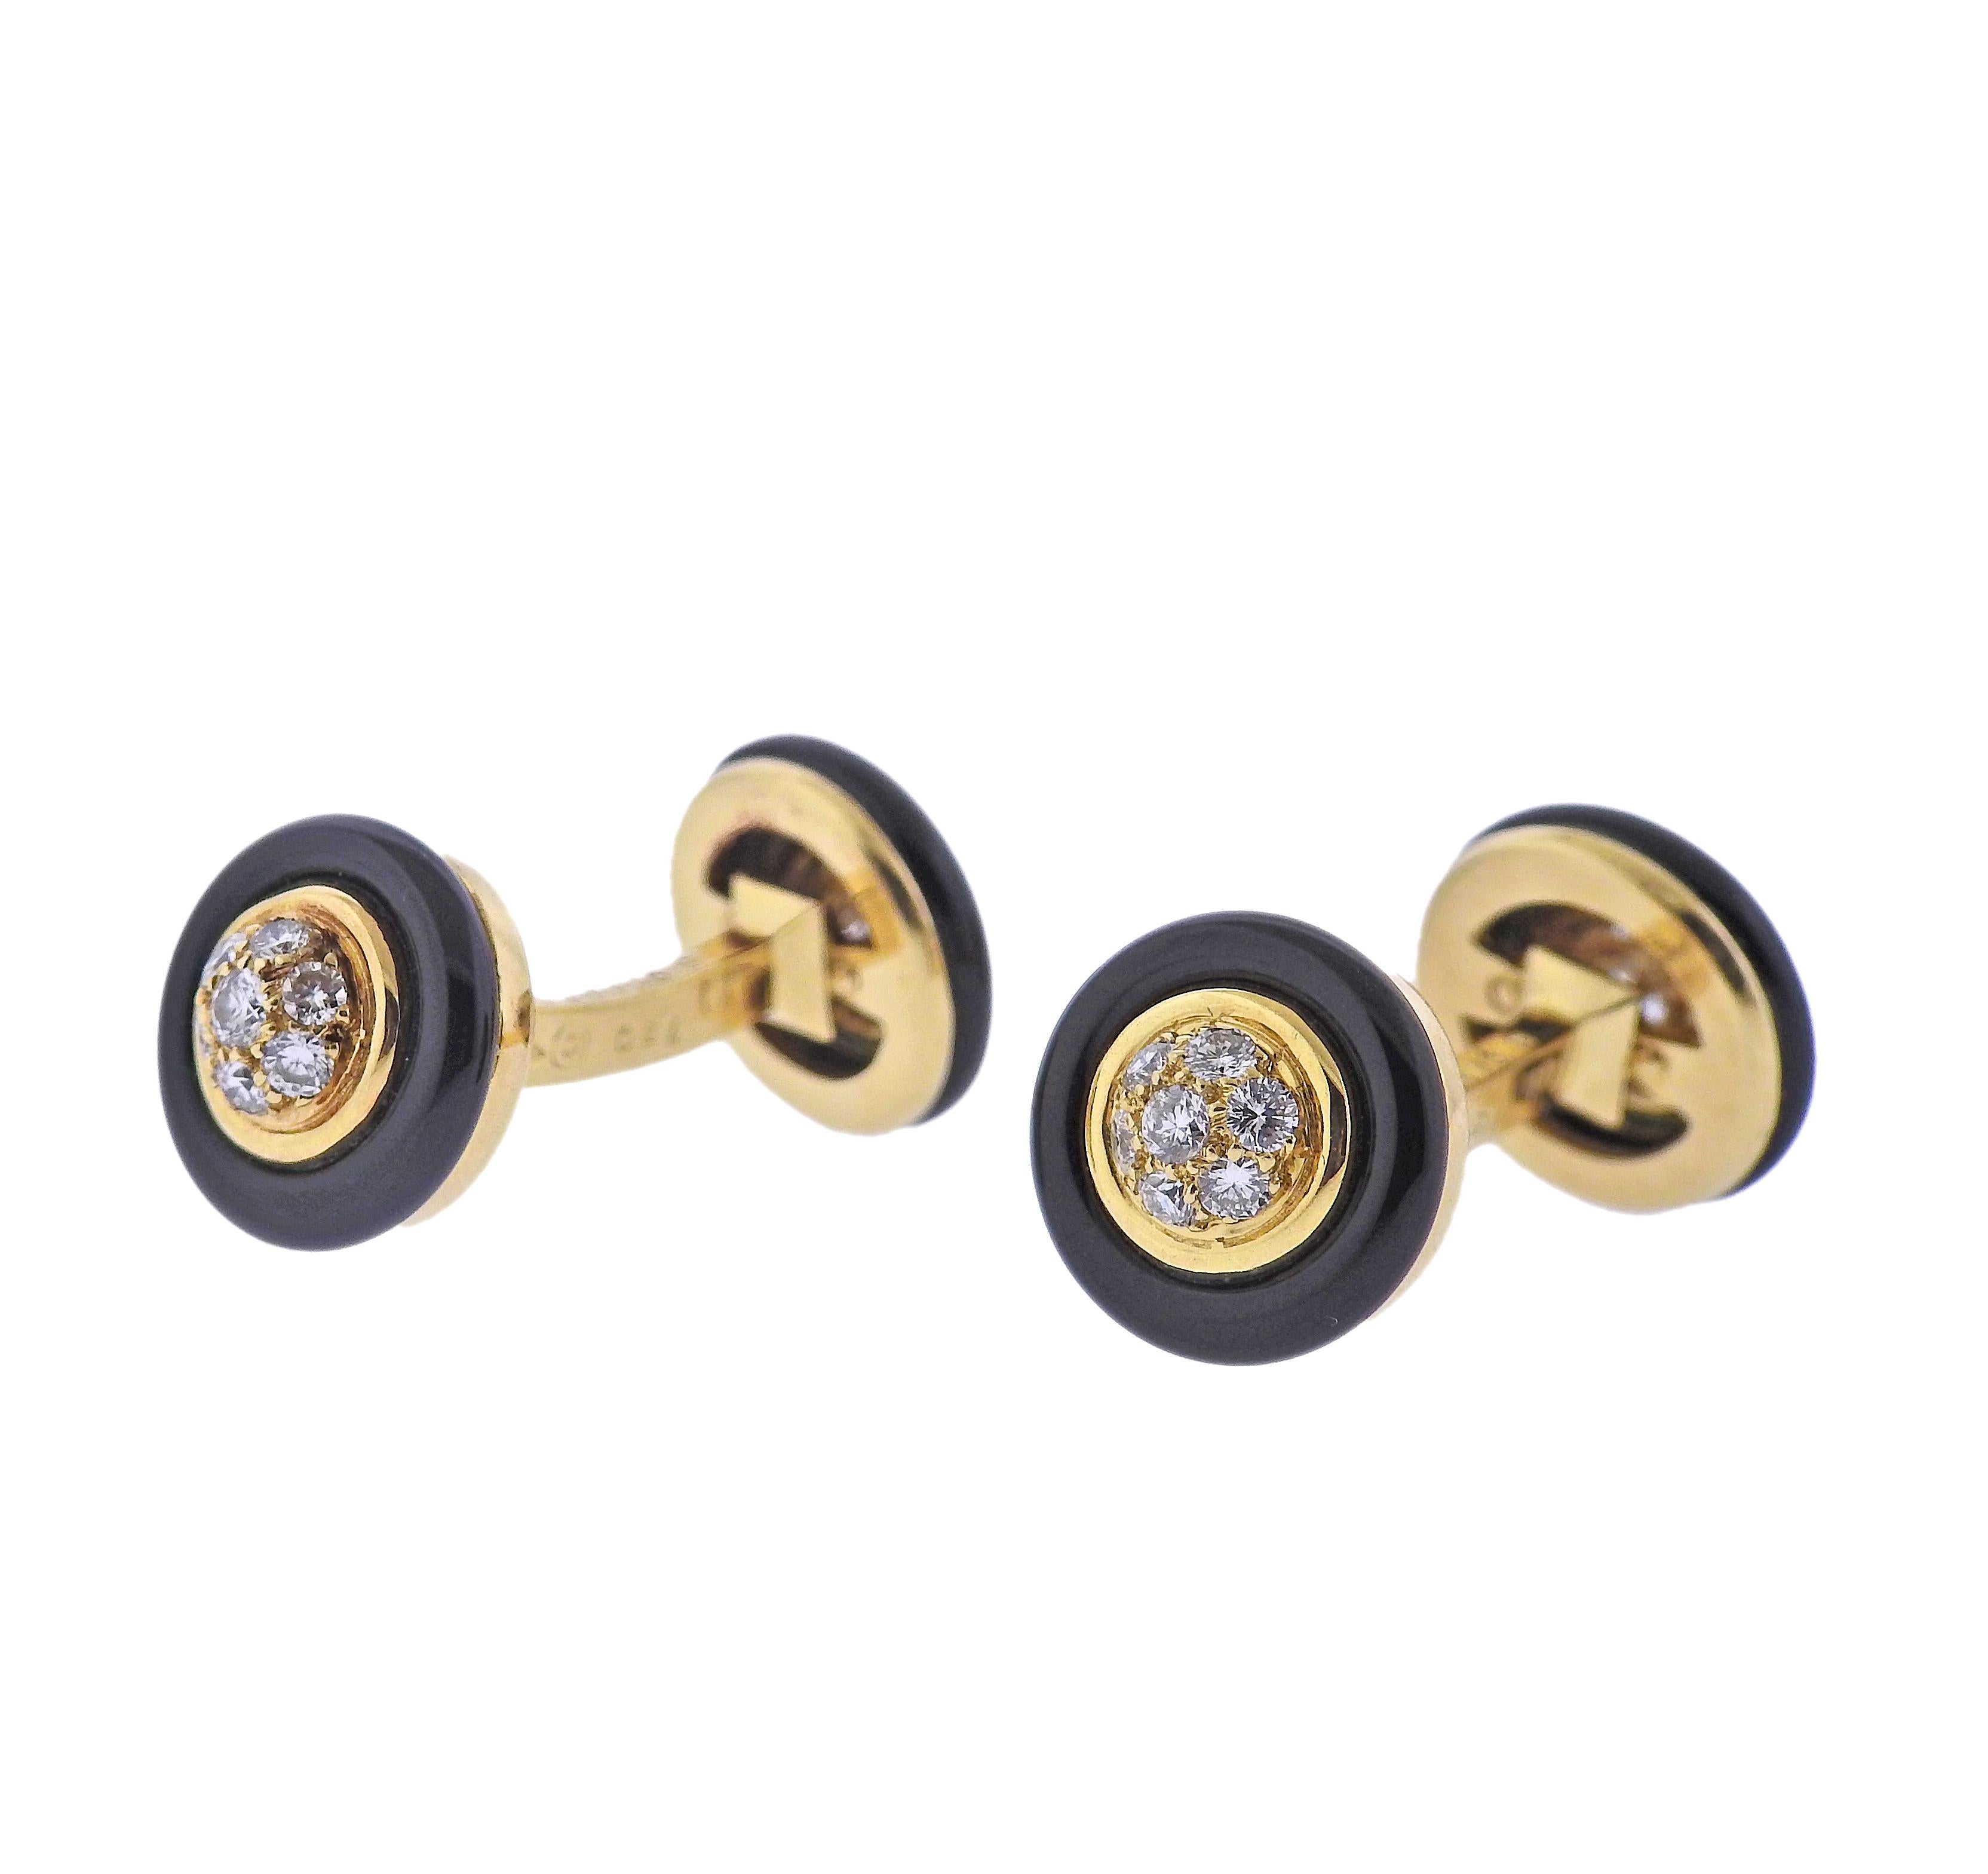 Pair of classic 18k gold Van Cleef & Arpels cufflinks, with onyx and approx. 0.64ctw F/VVS diamonds. Cufflink top is 12mm in diameter. Marked: VCA, B 9102X28, 83, French marks. Weight - 12.5 grams.